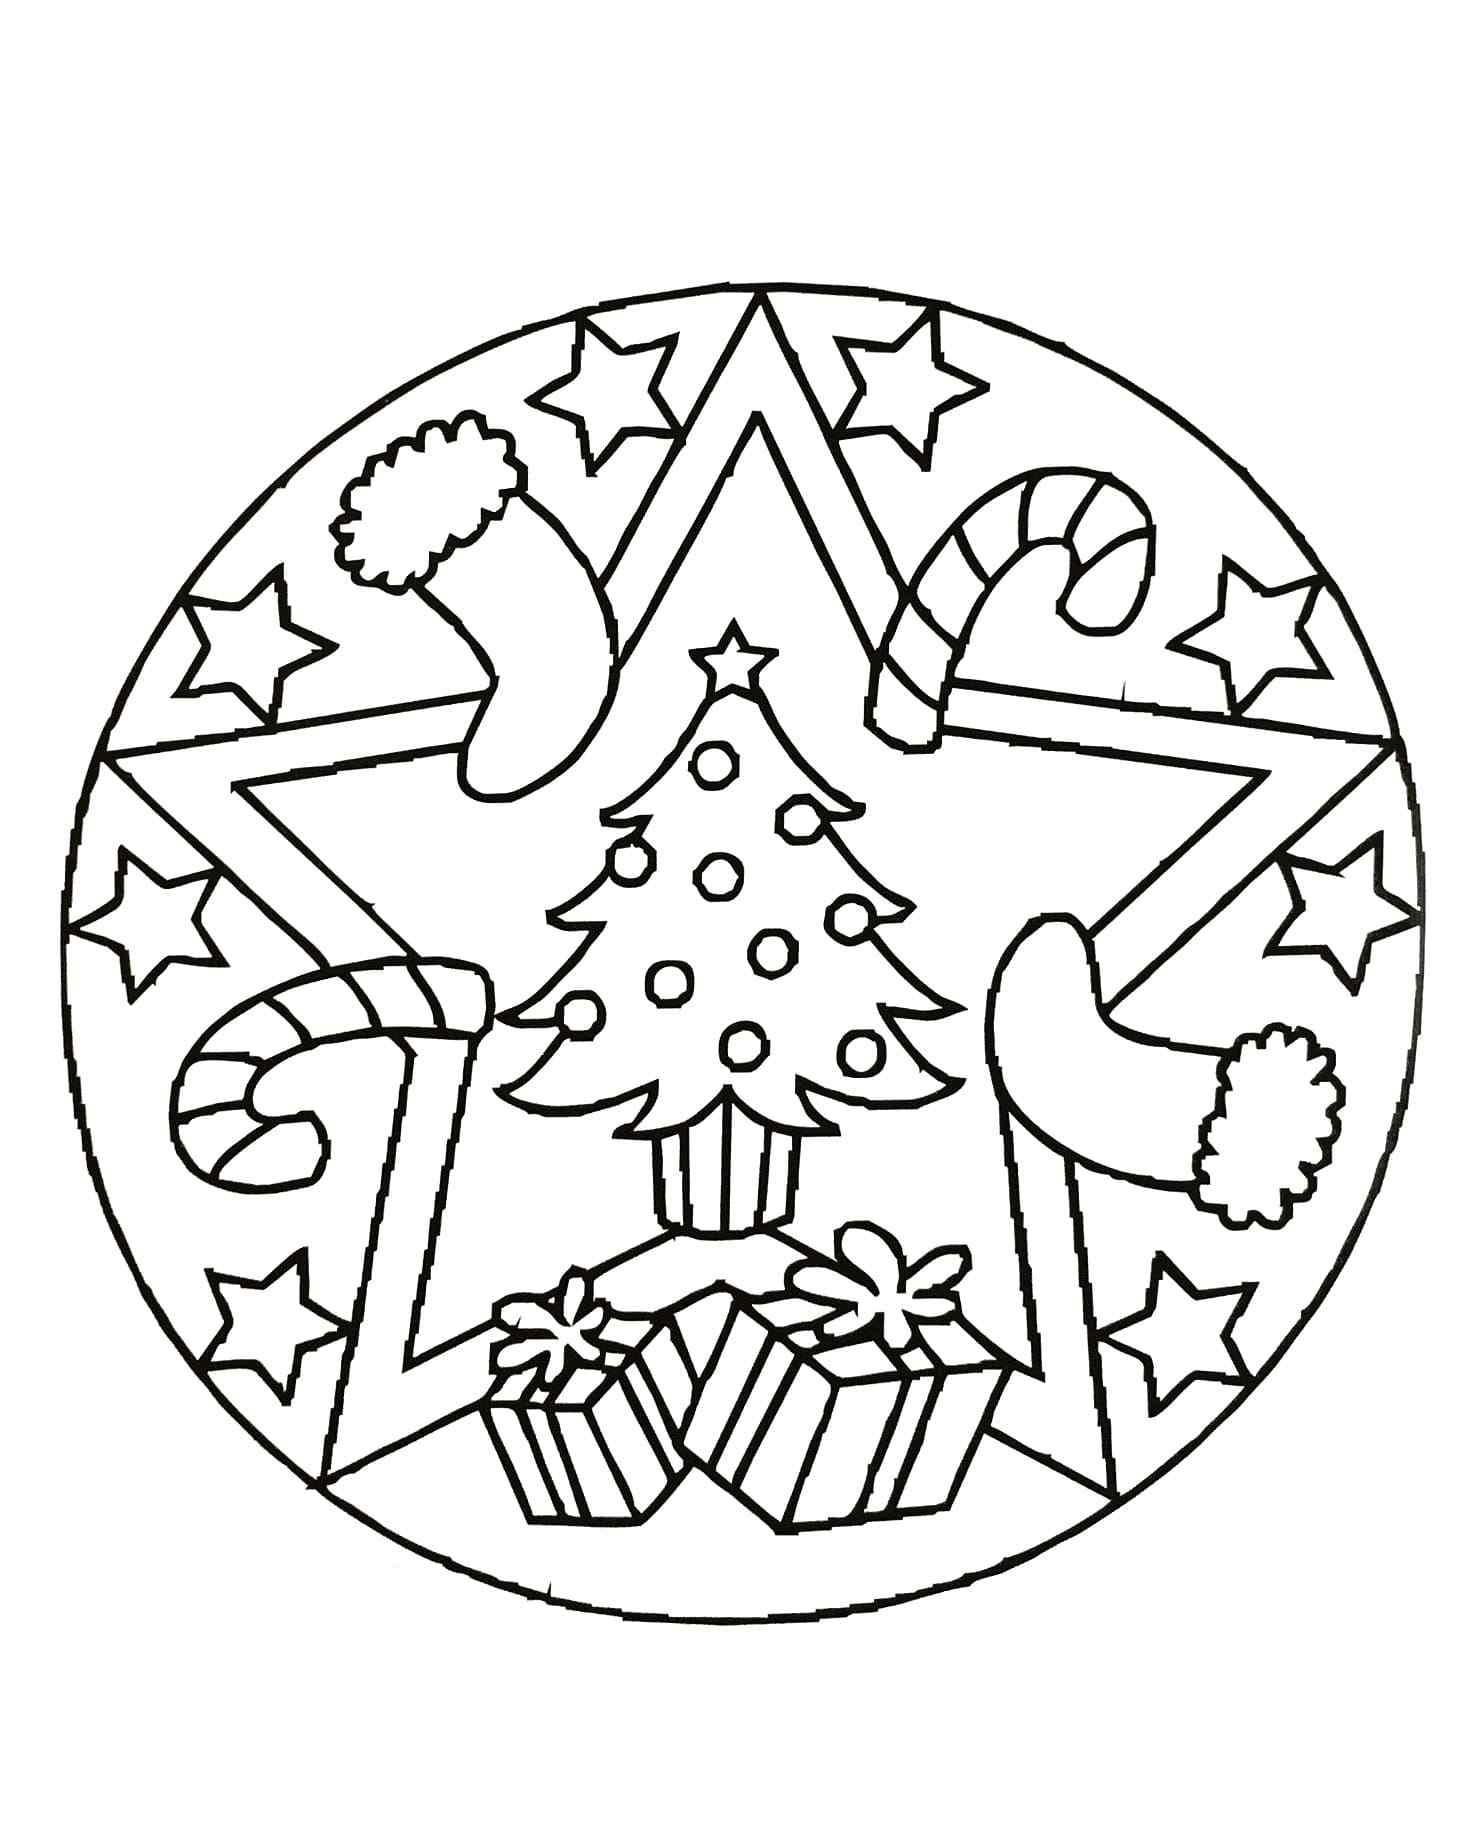 Christmas Plate With Festive Attributes Coloring Page